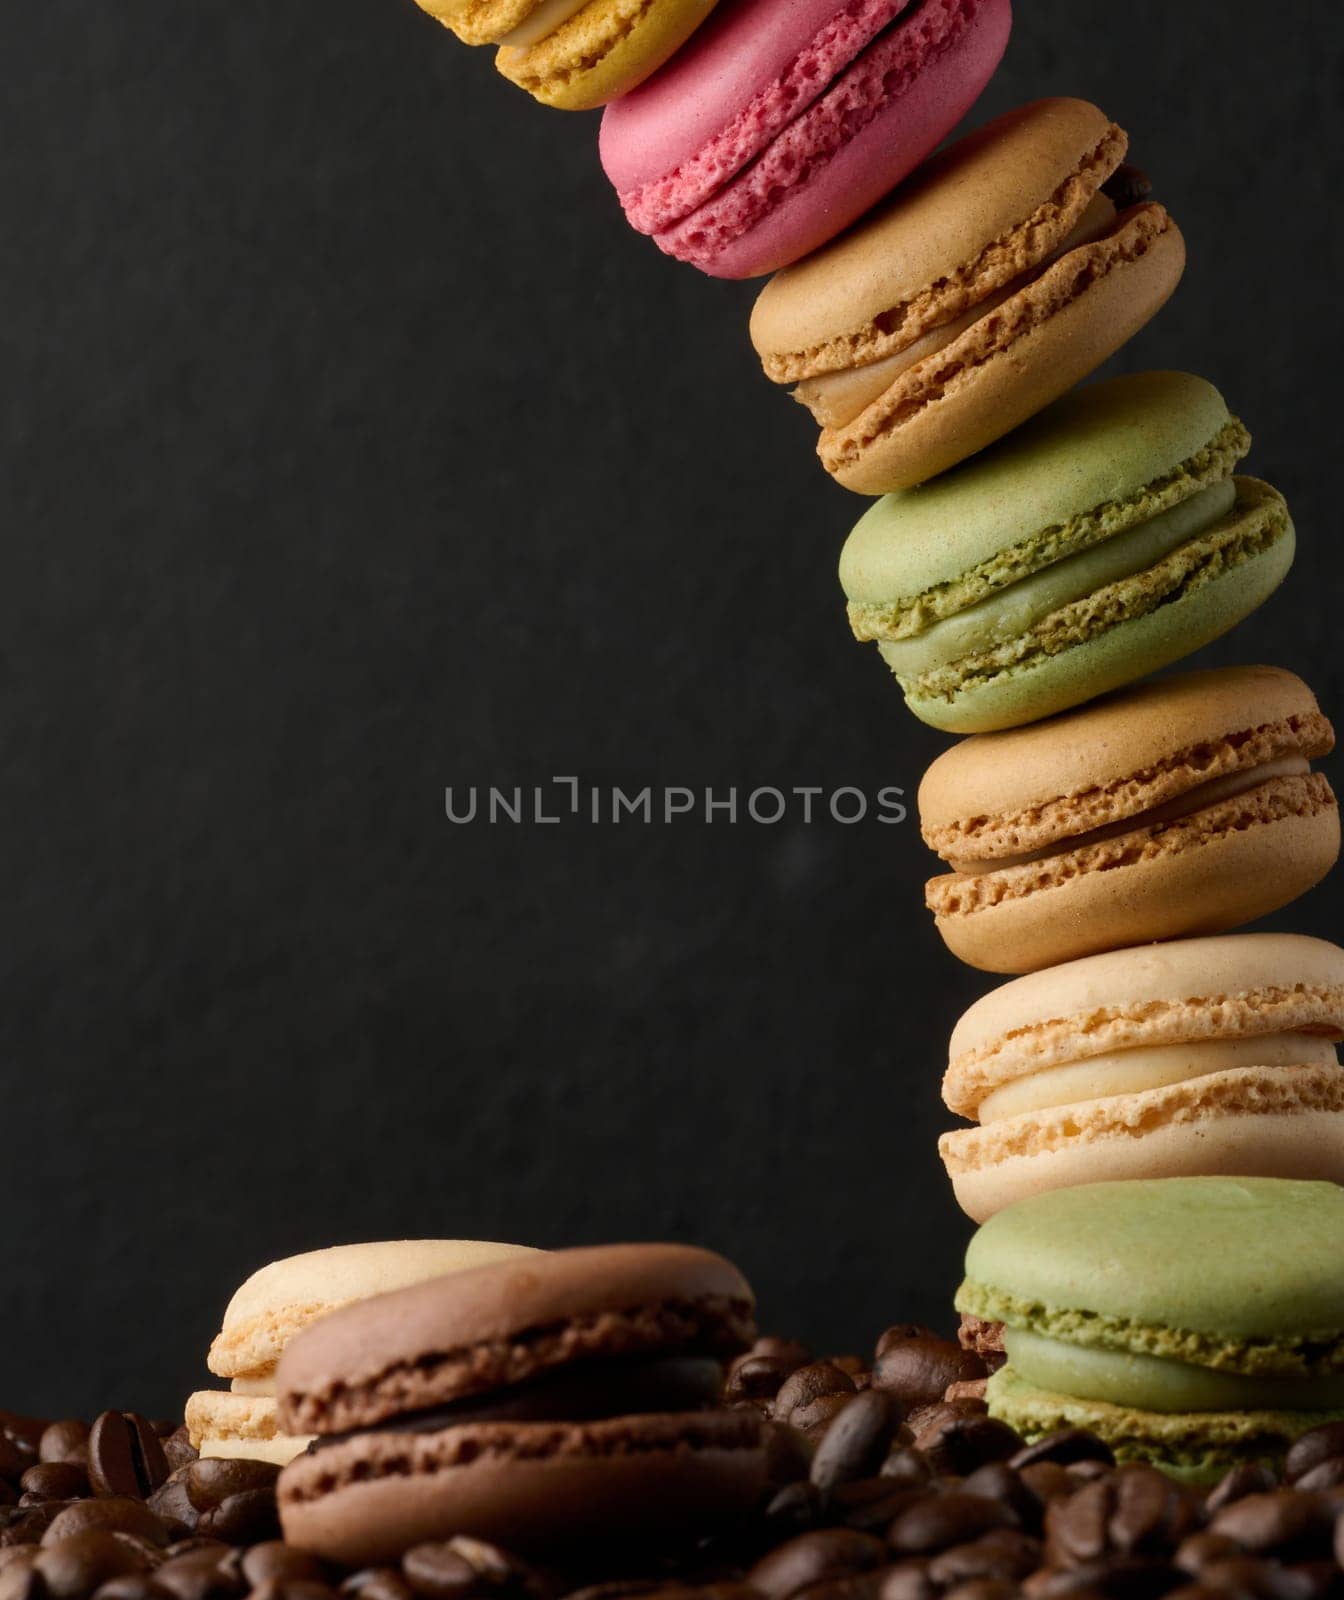 Stack of multi-colored macarons on a background of coffee beans, black background by ndanko